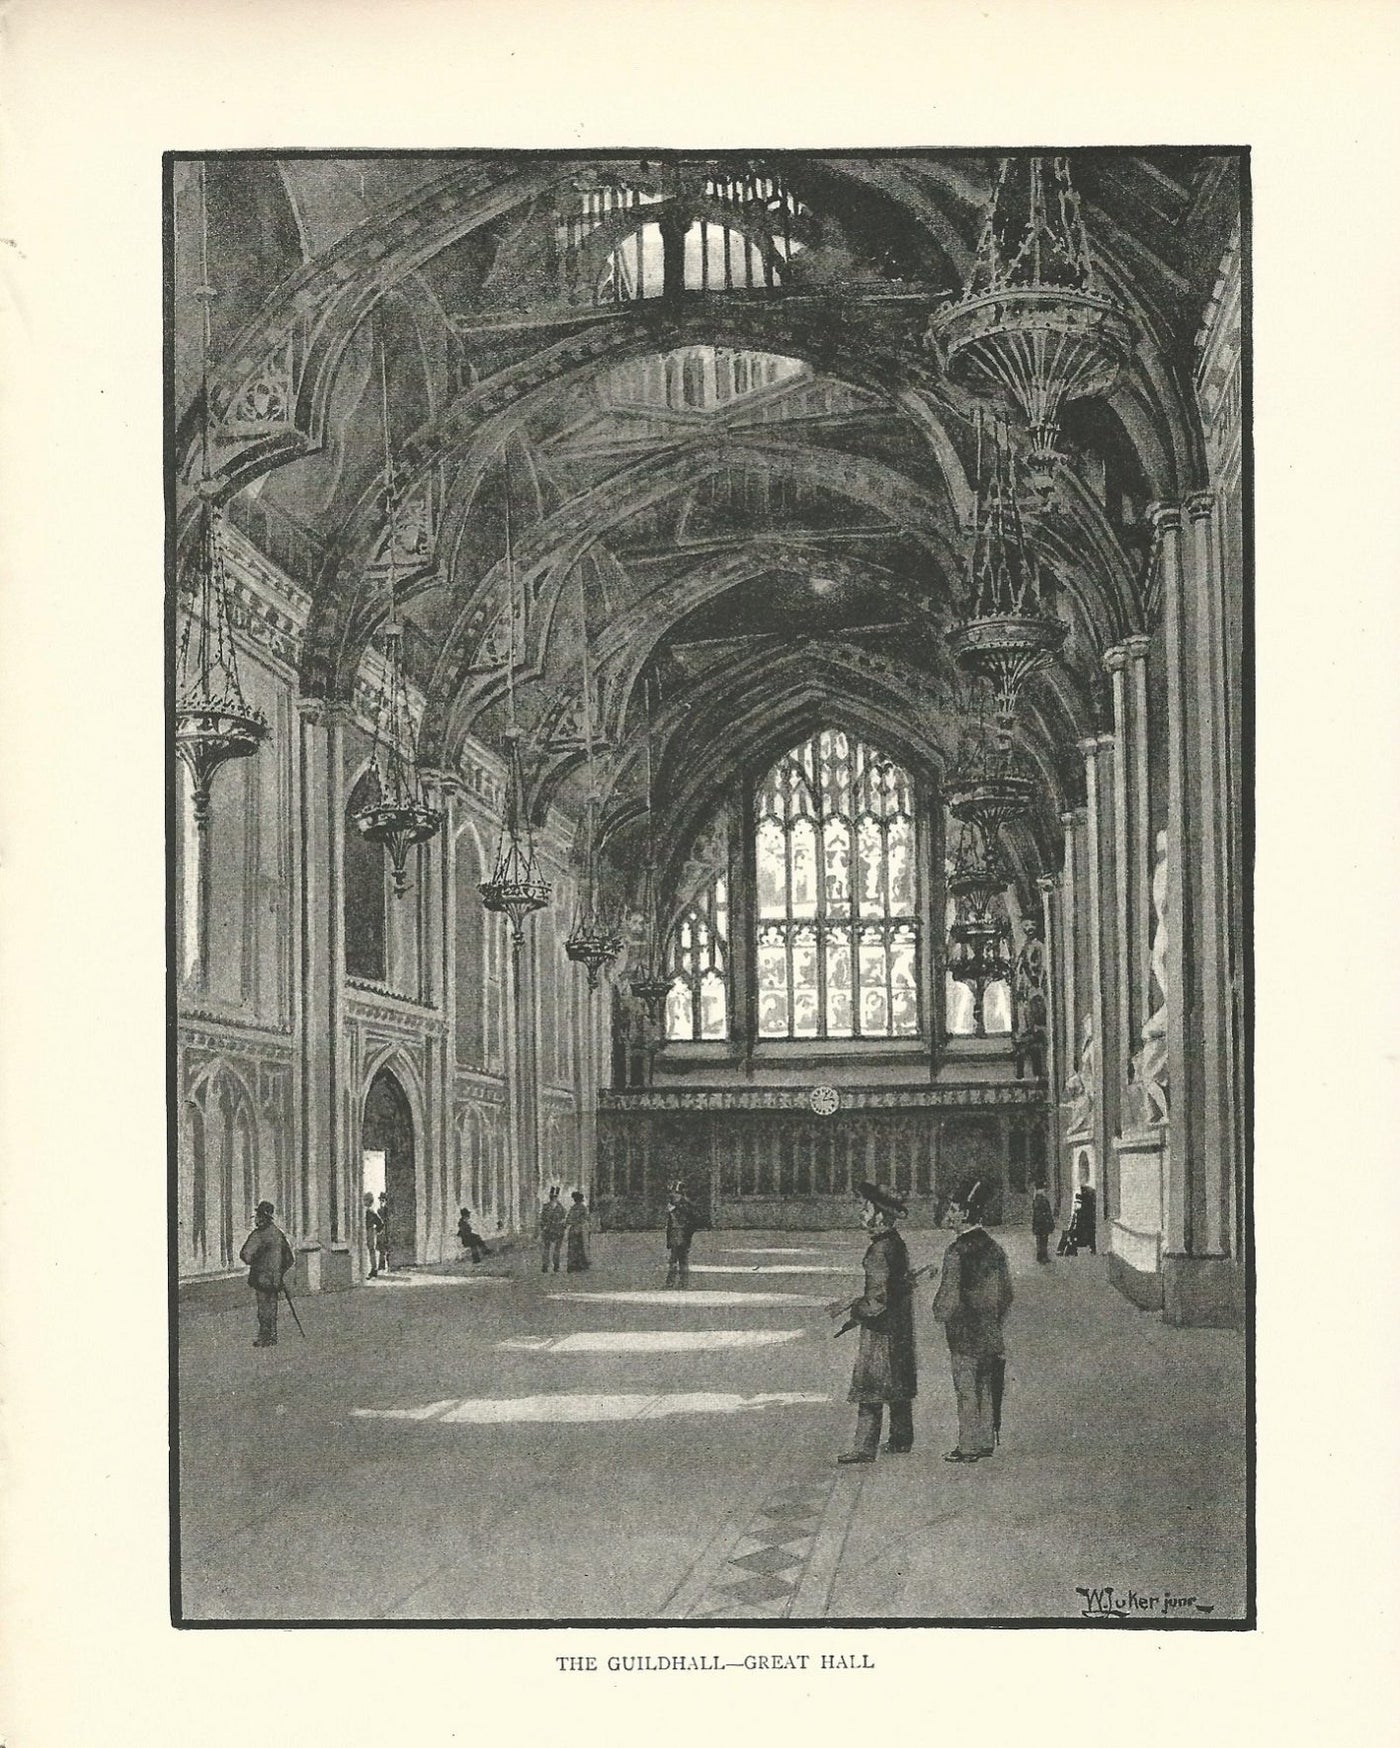 Guildhall Great Hall antique print published 1890